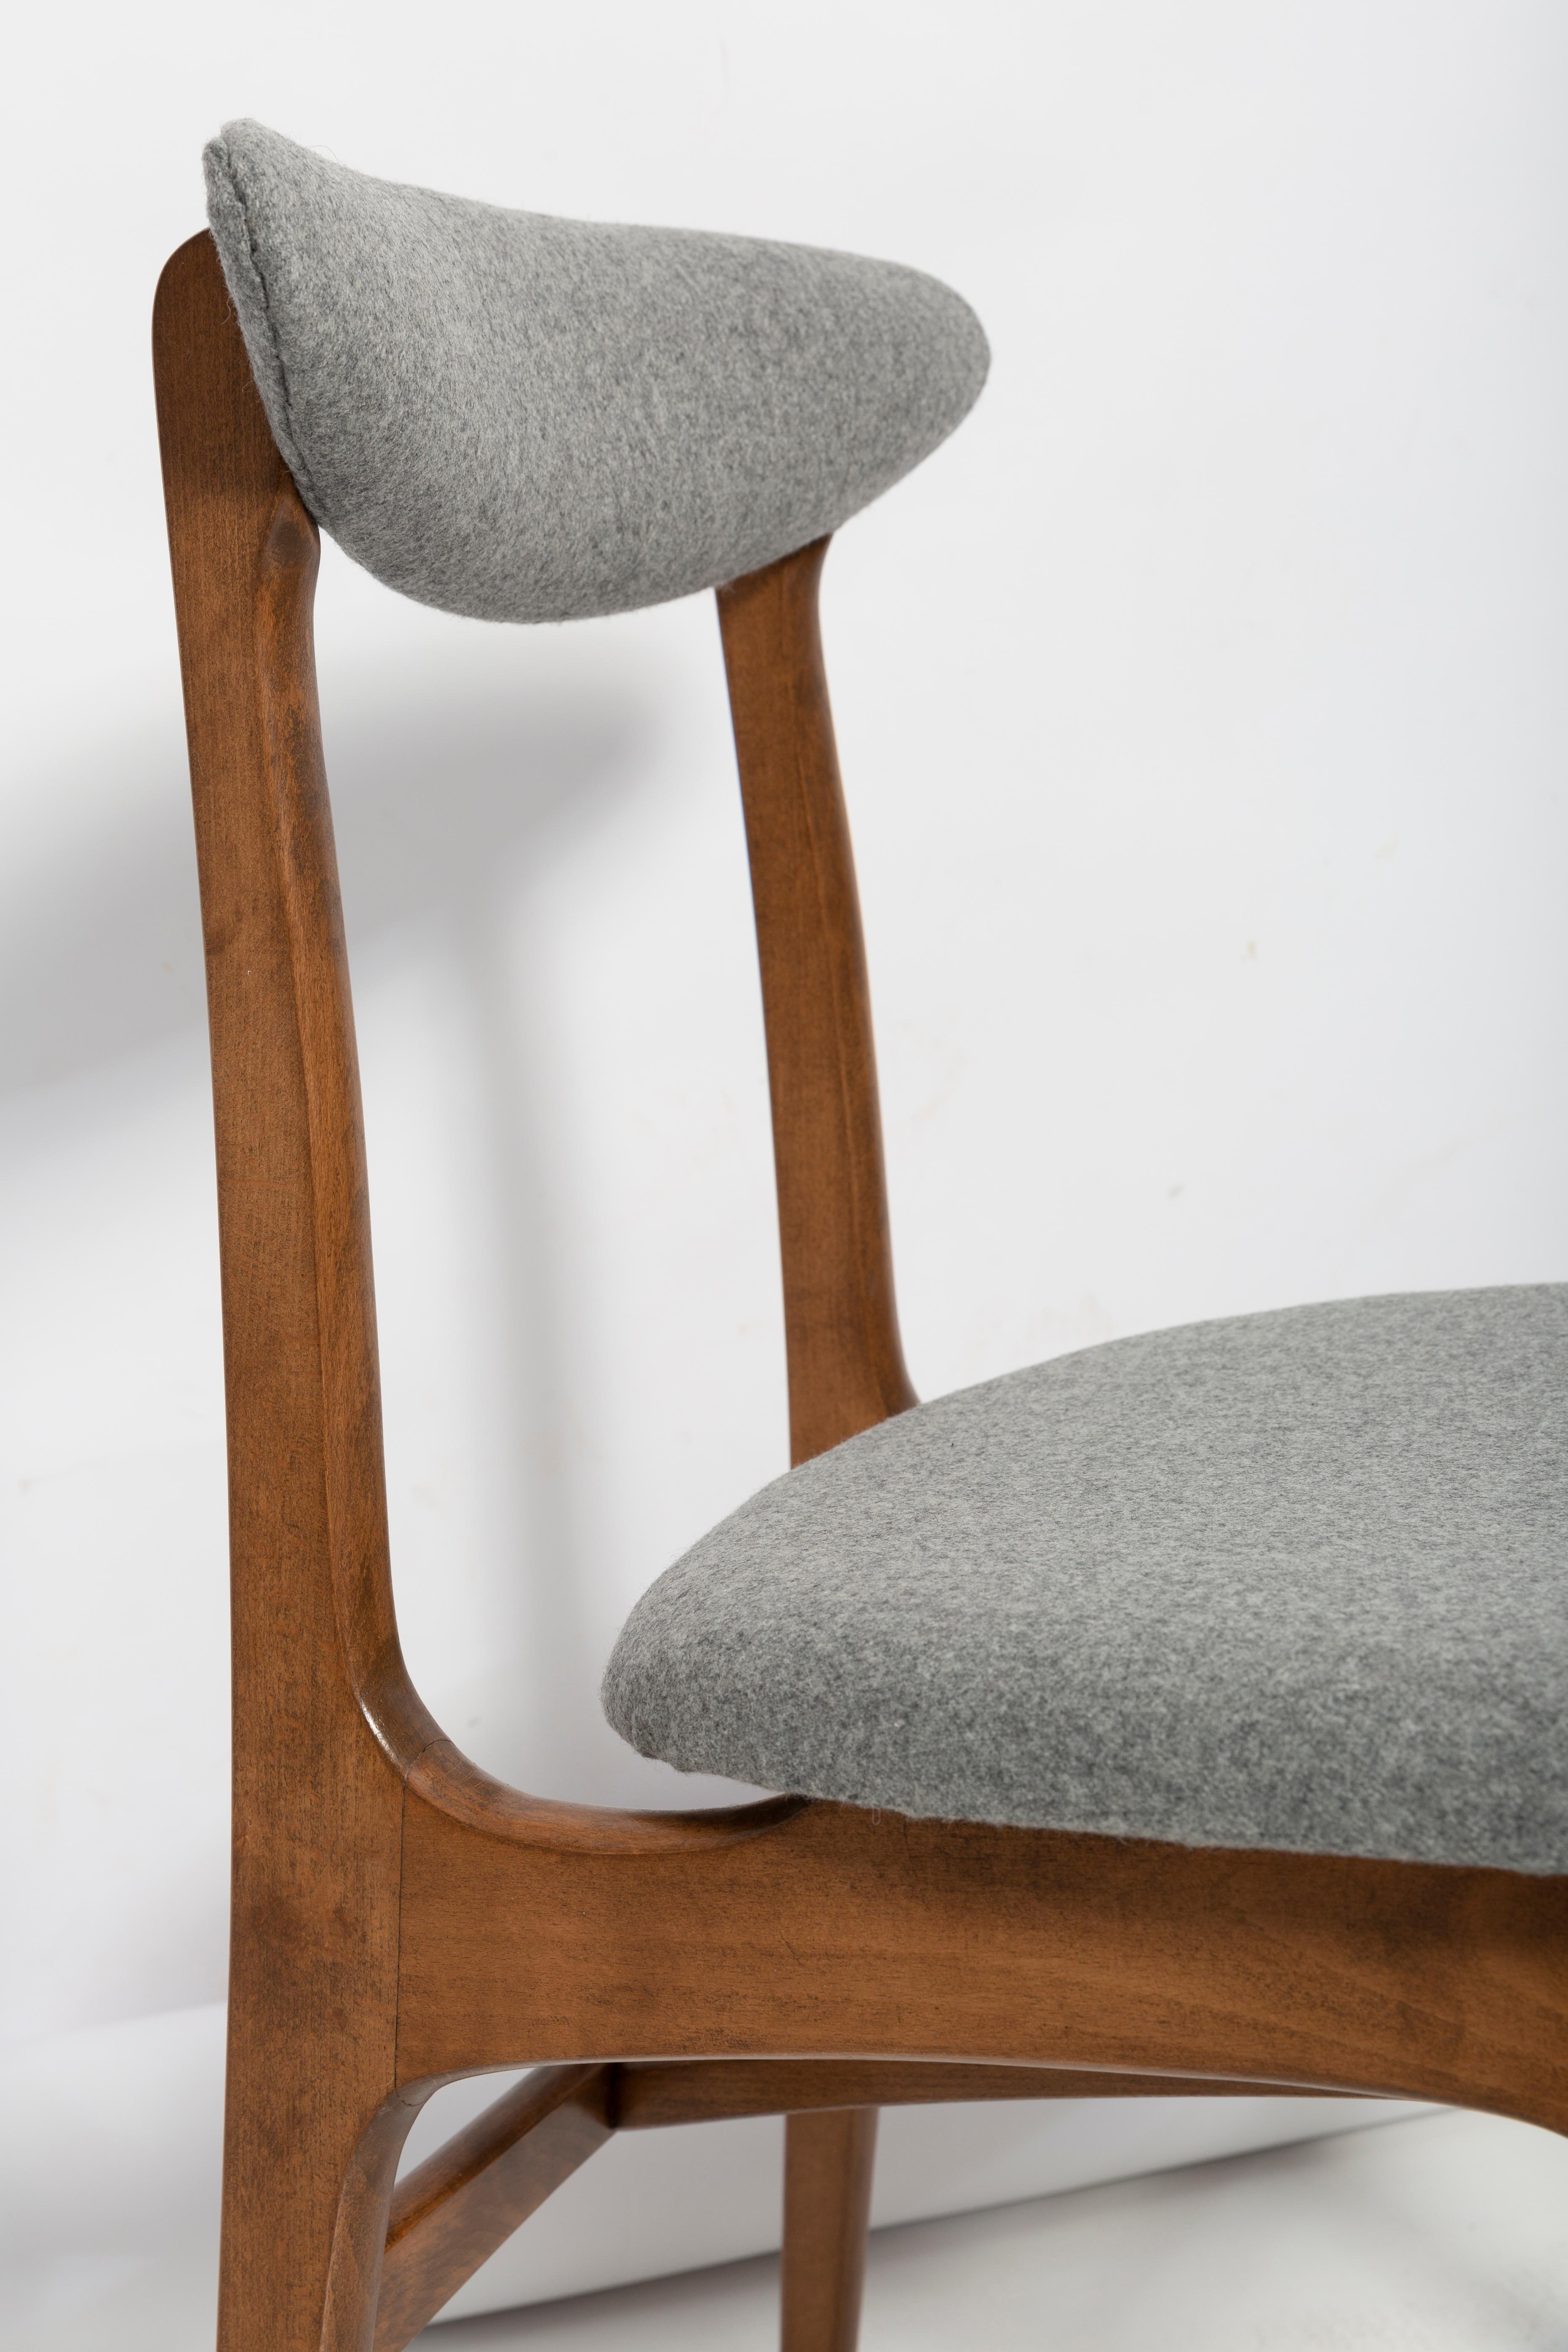 Hand-Crafted Set of Six Mid Century Gray Wool Chairs by Rajmund Halas, Poland, 1960s For Sale